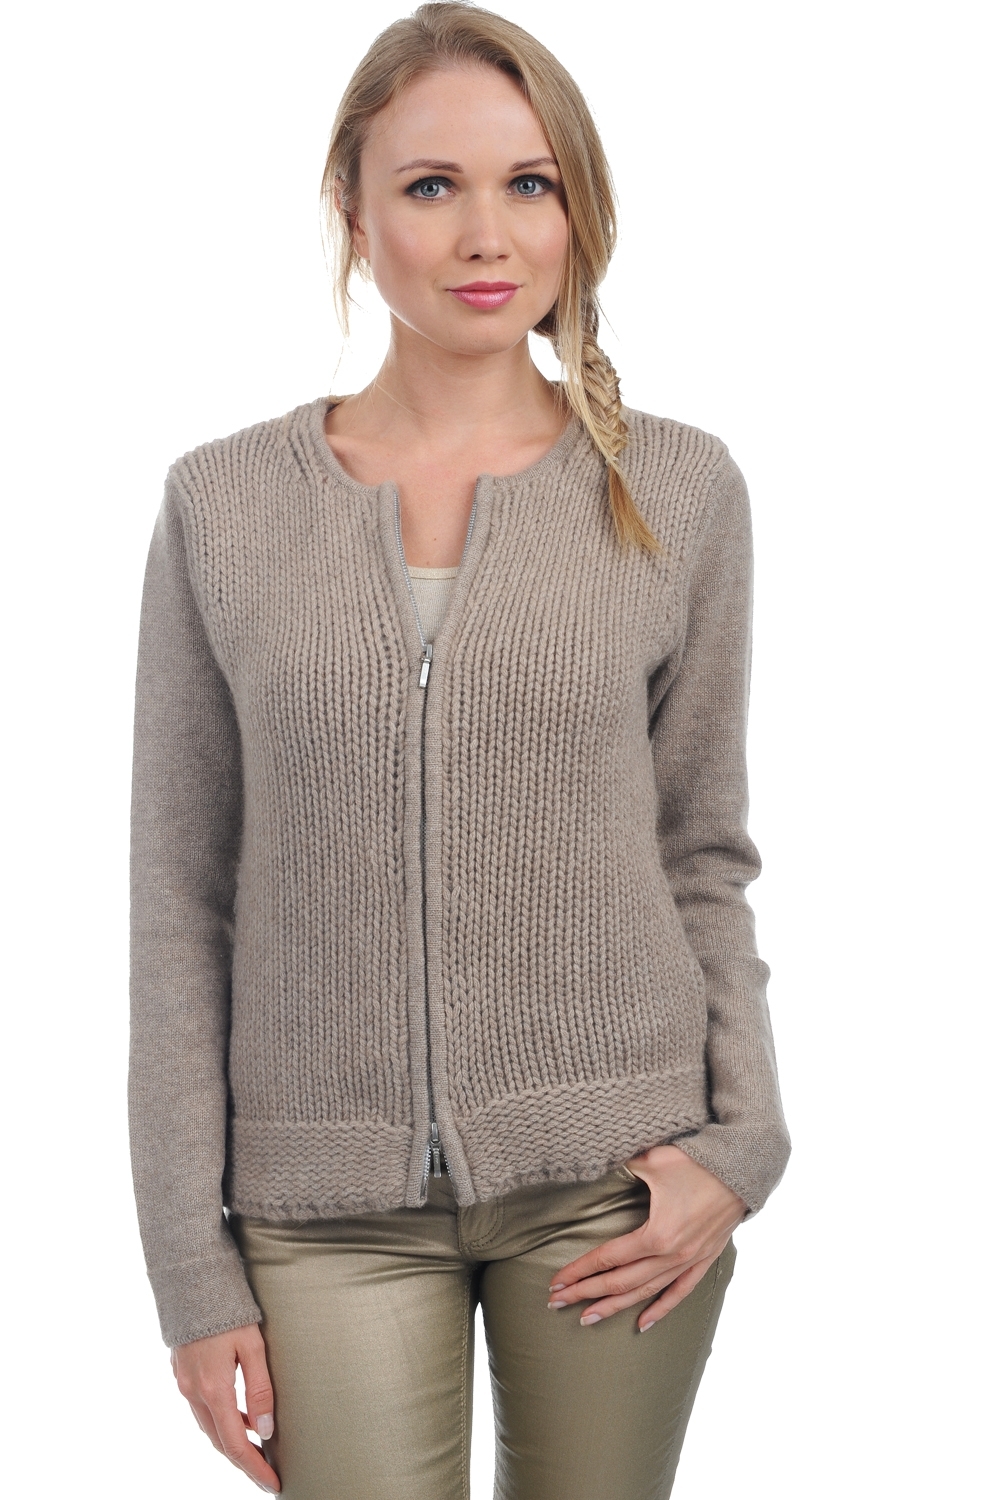 Cachemire pull femme zip capuche neola natural brown xs